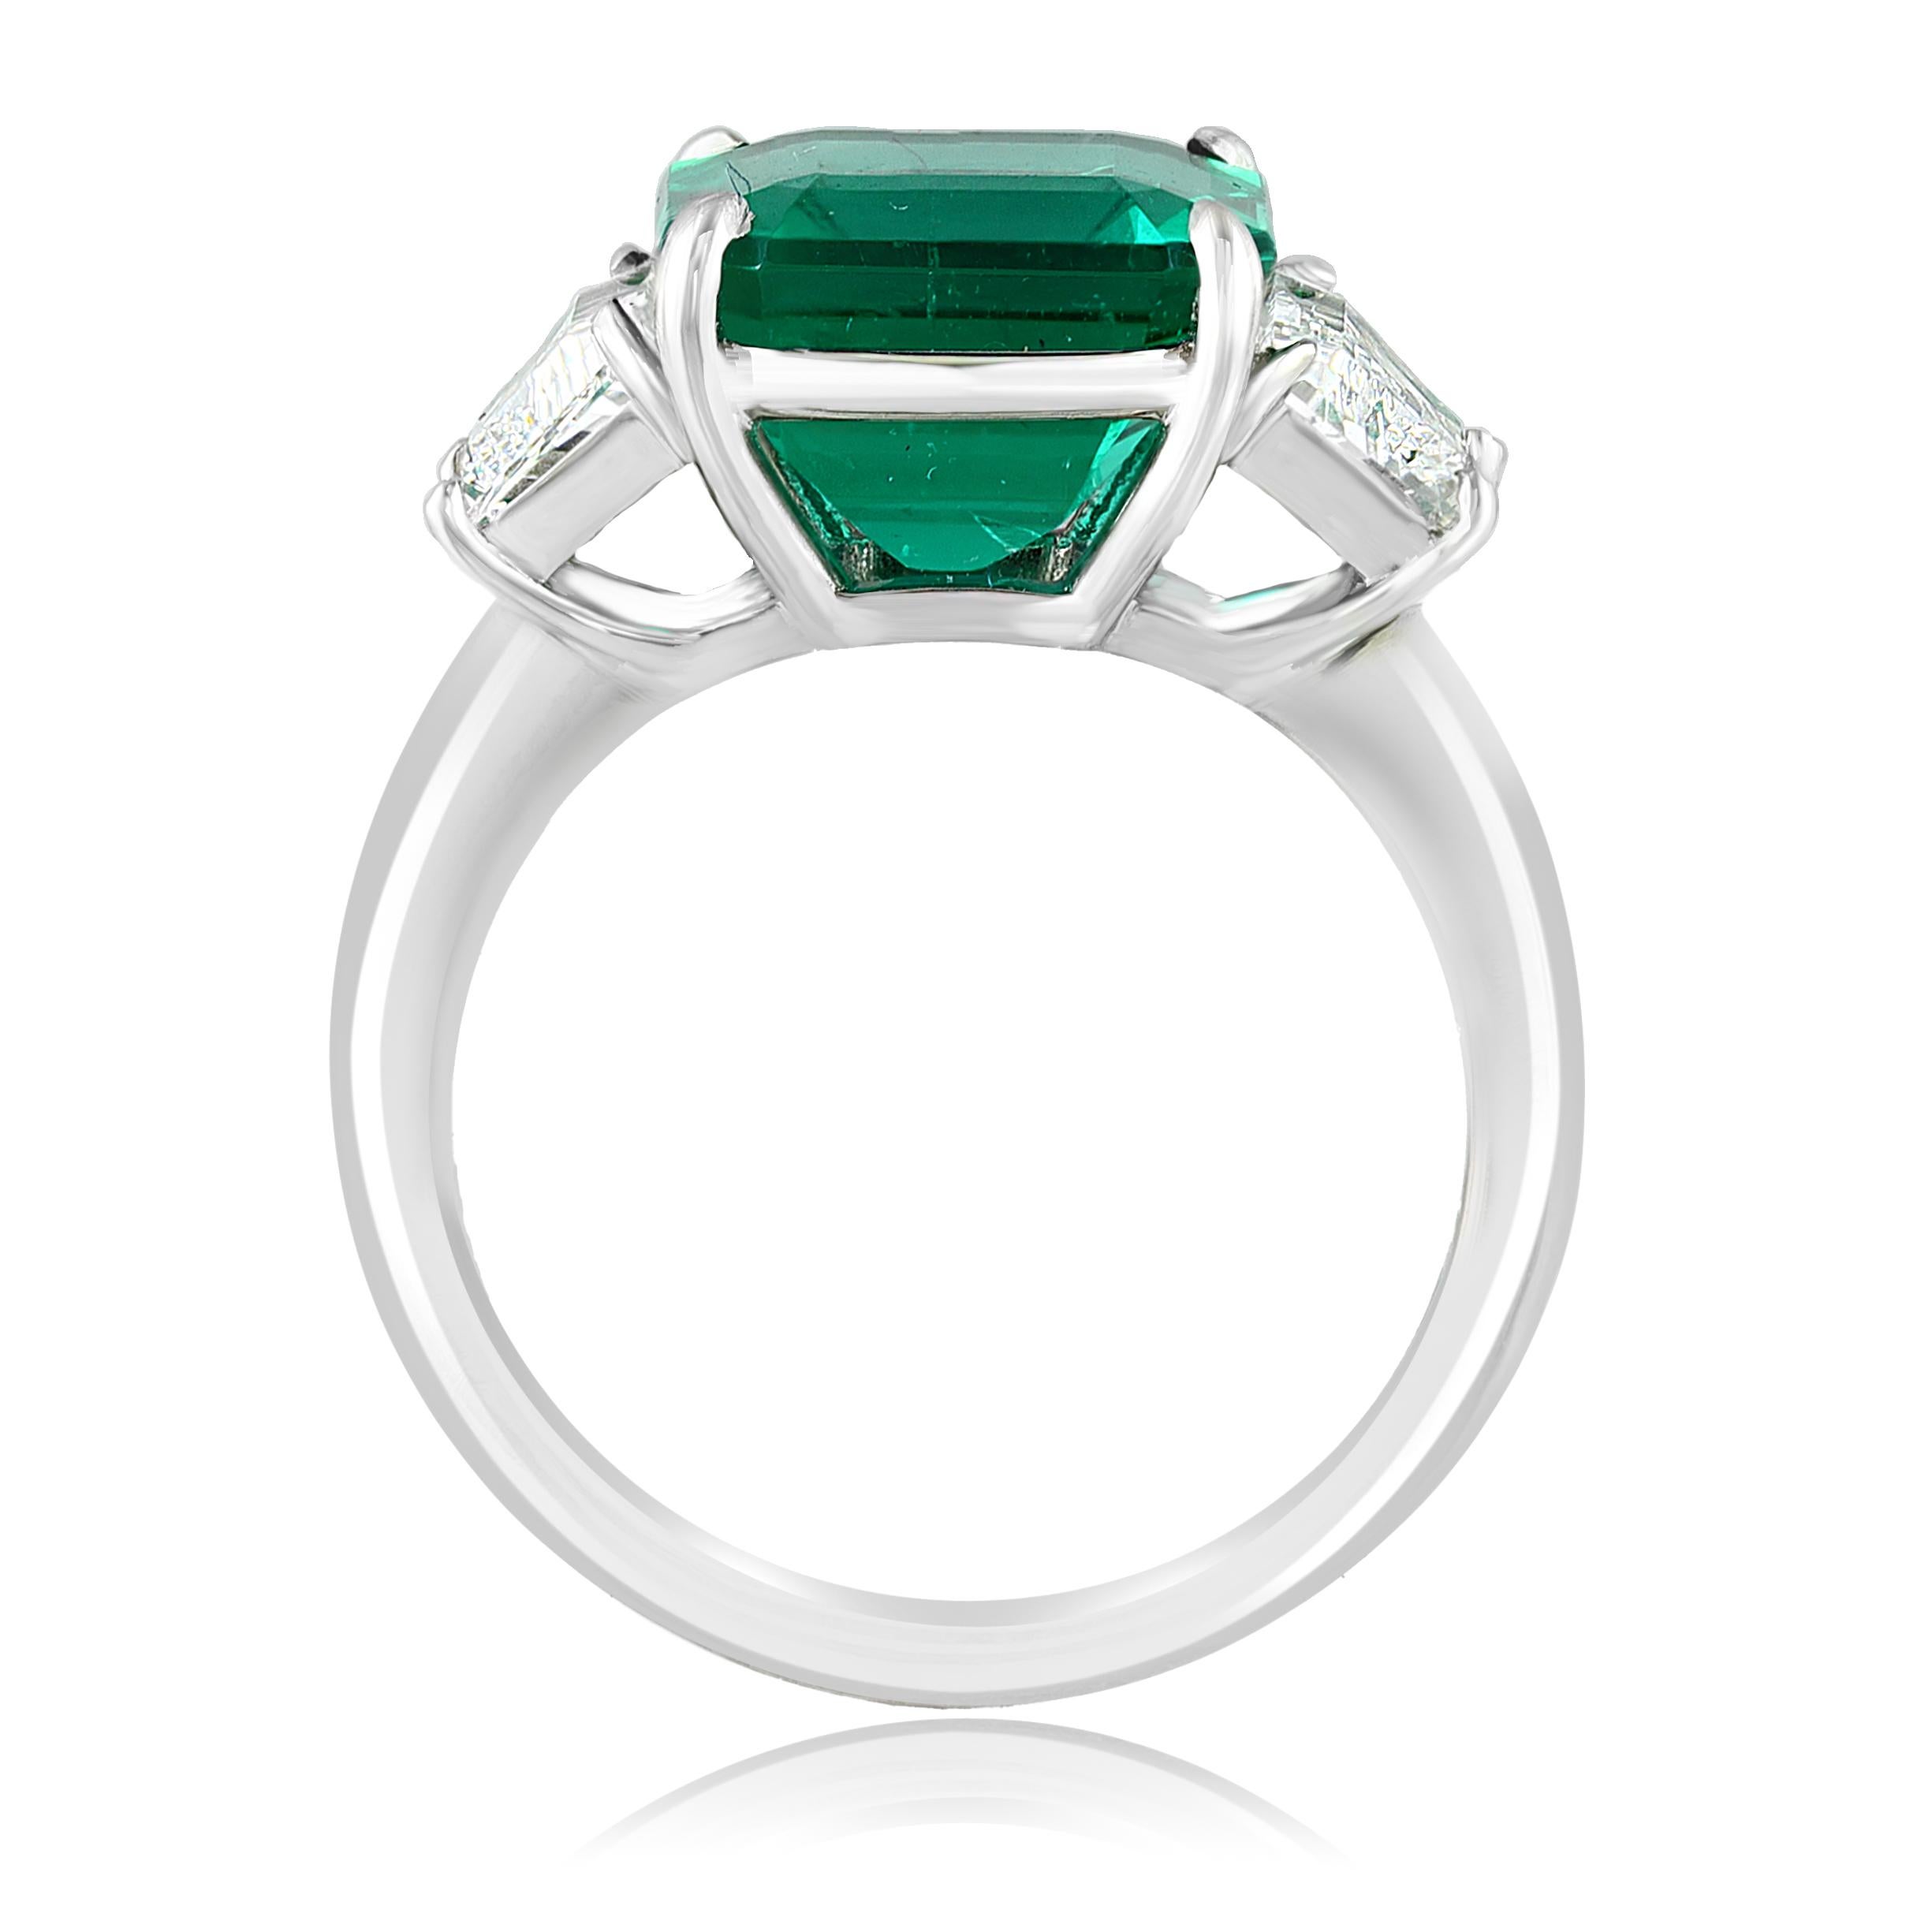 Certified 4.78 Carat Emerald Cut Emerald Diamond Engagement Ring in Platinum In New Condition For Sale In NEW YORK, NY